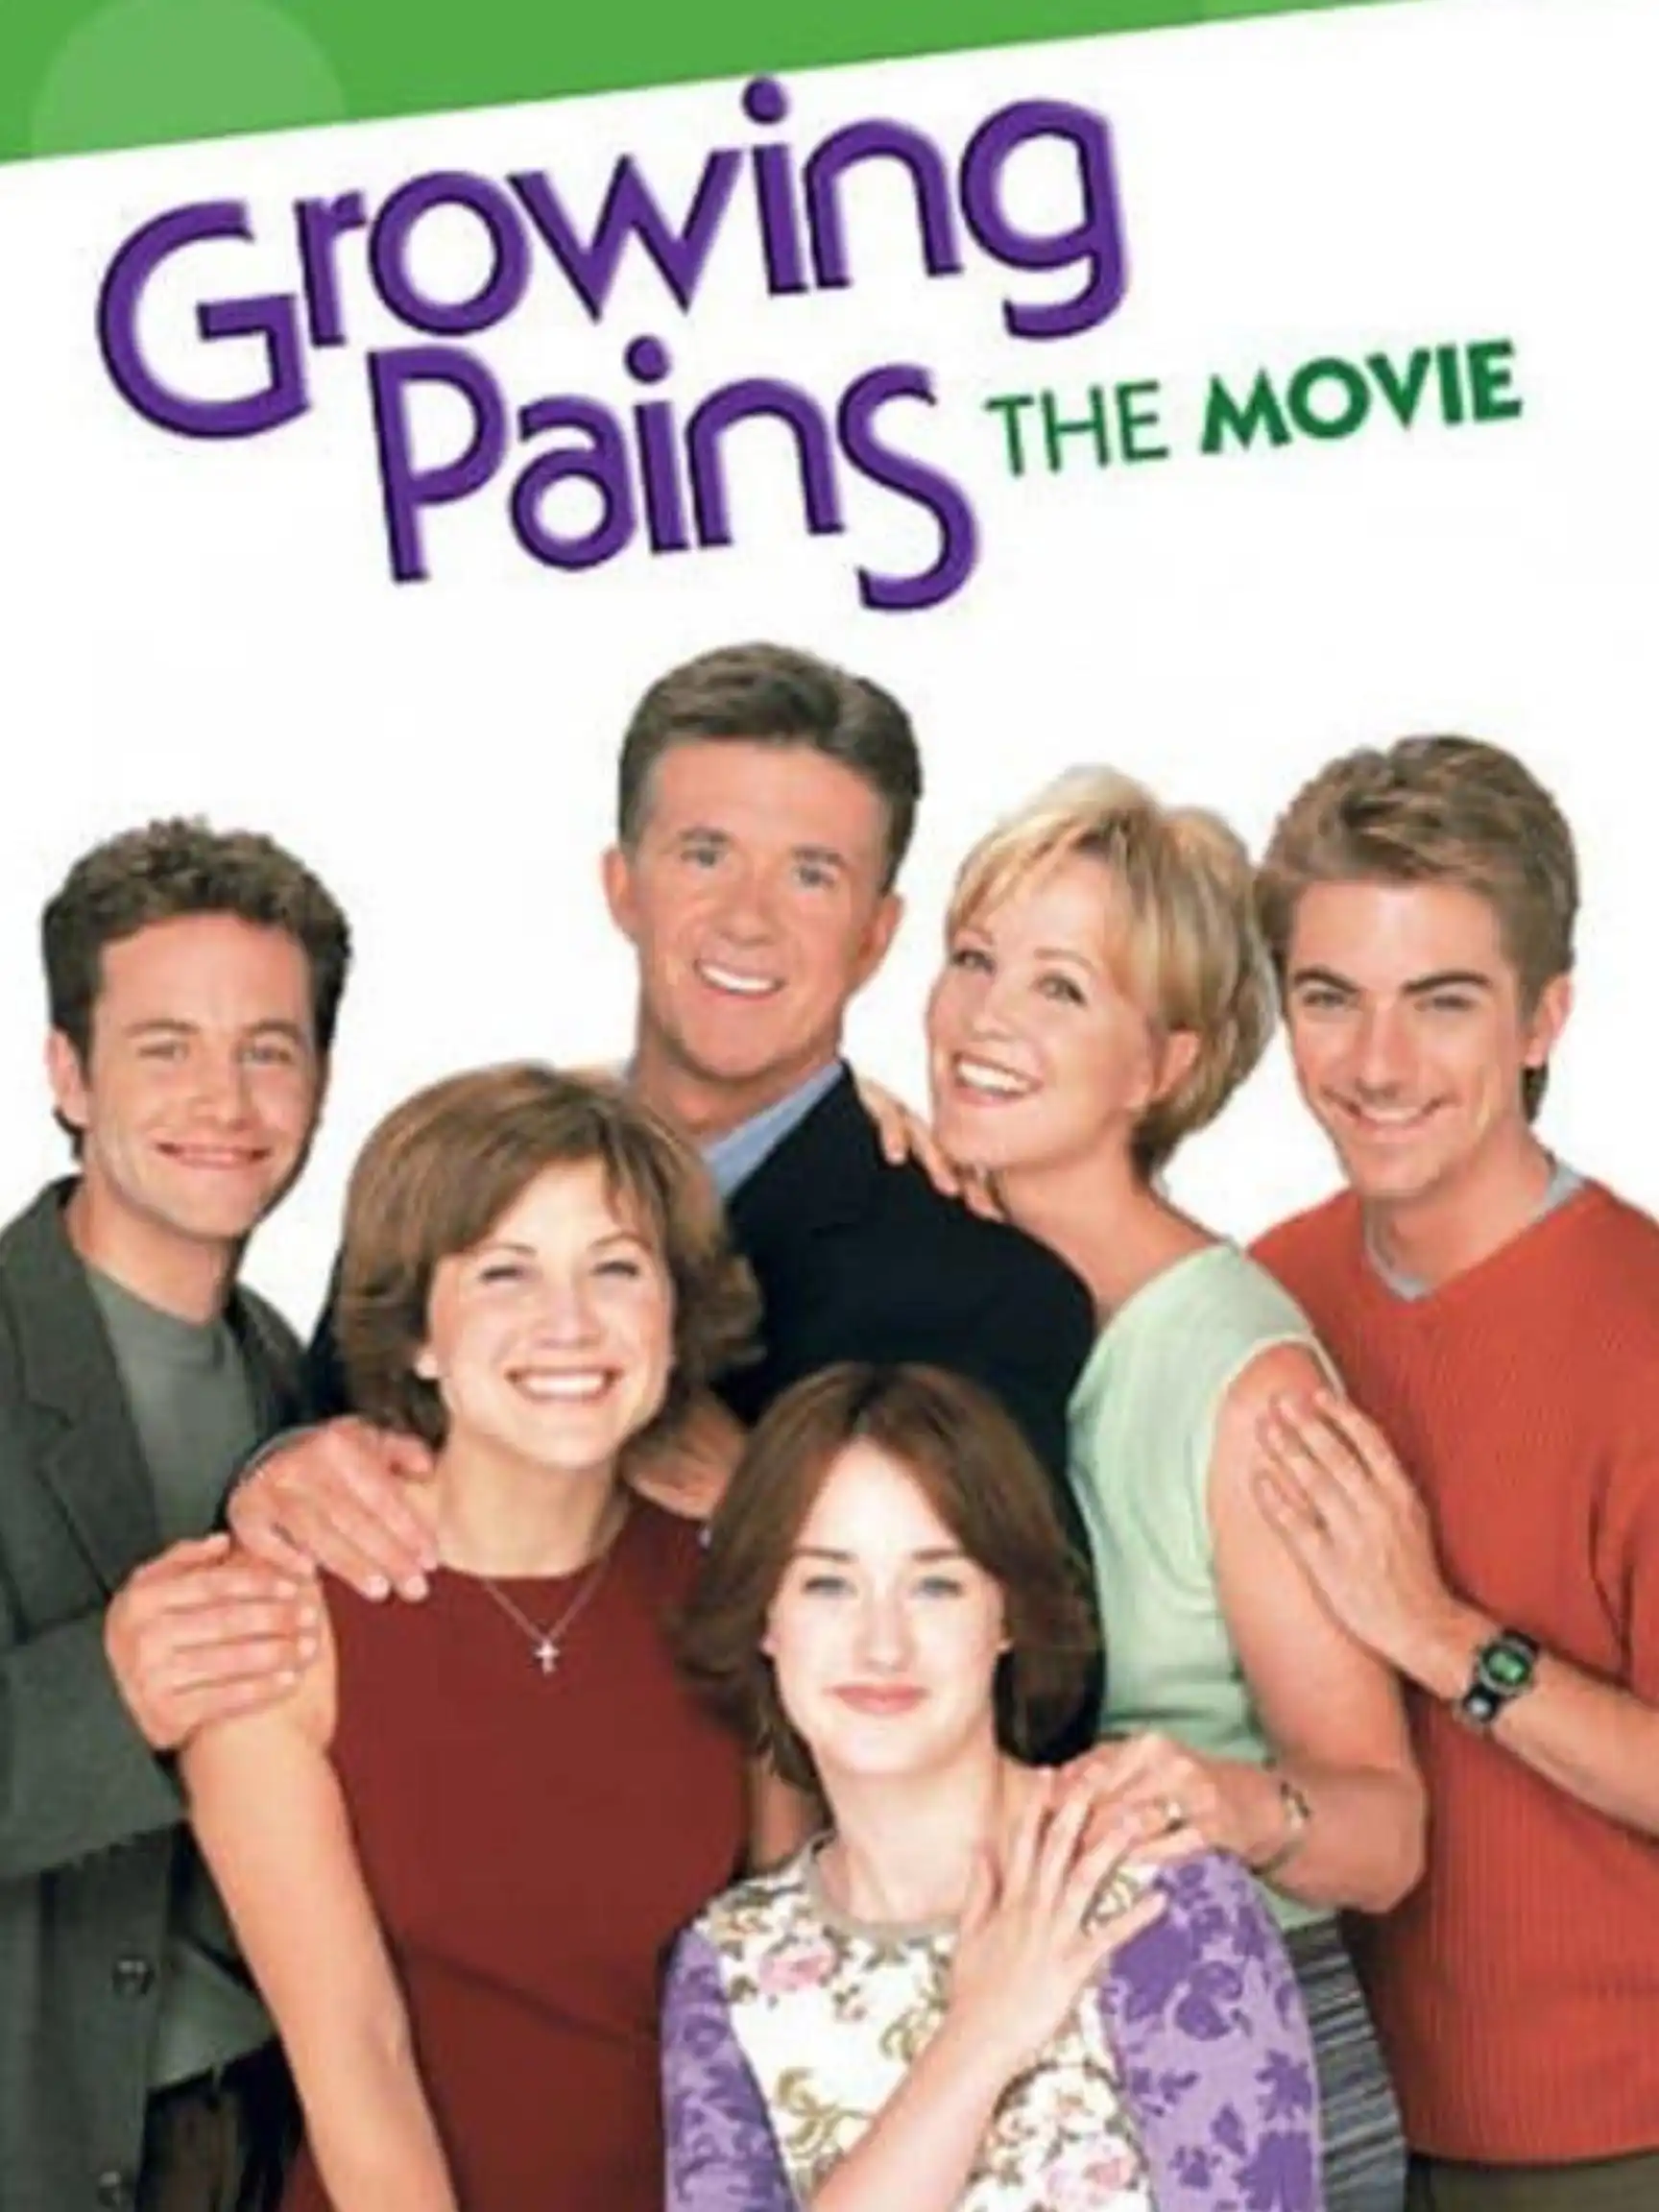 Watch and Download The Growing Pains Movie 2